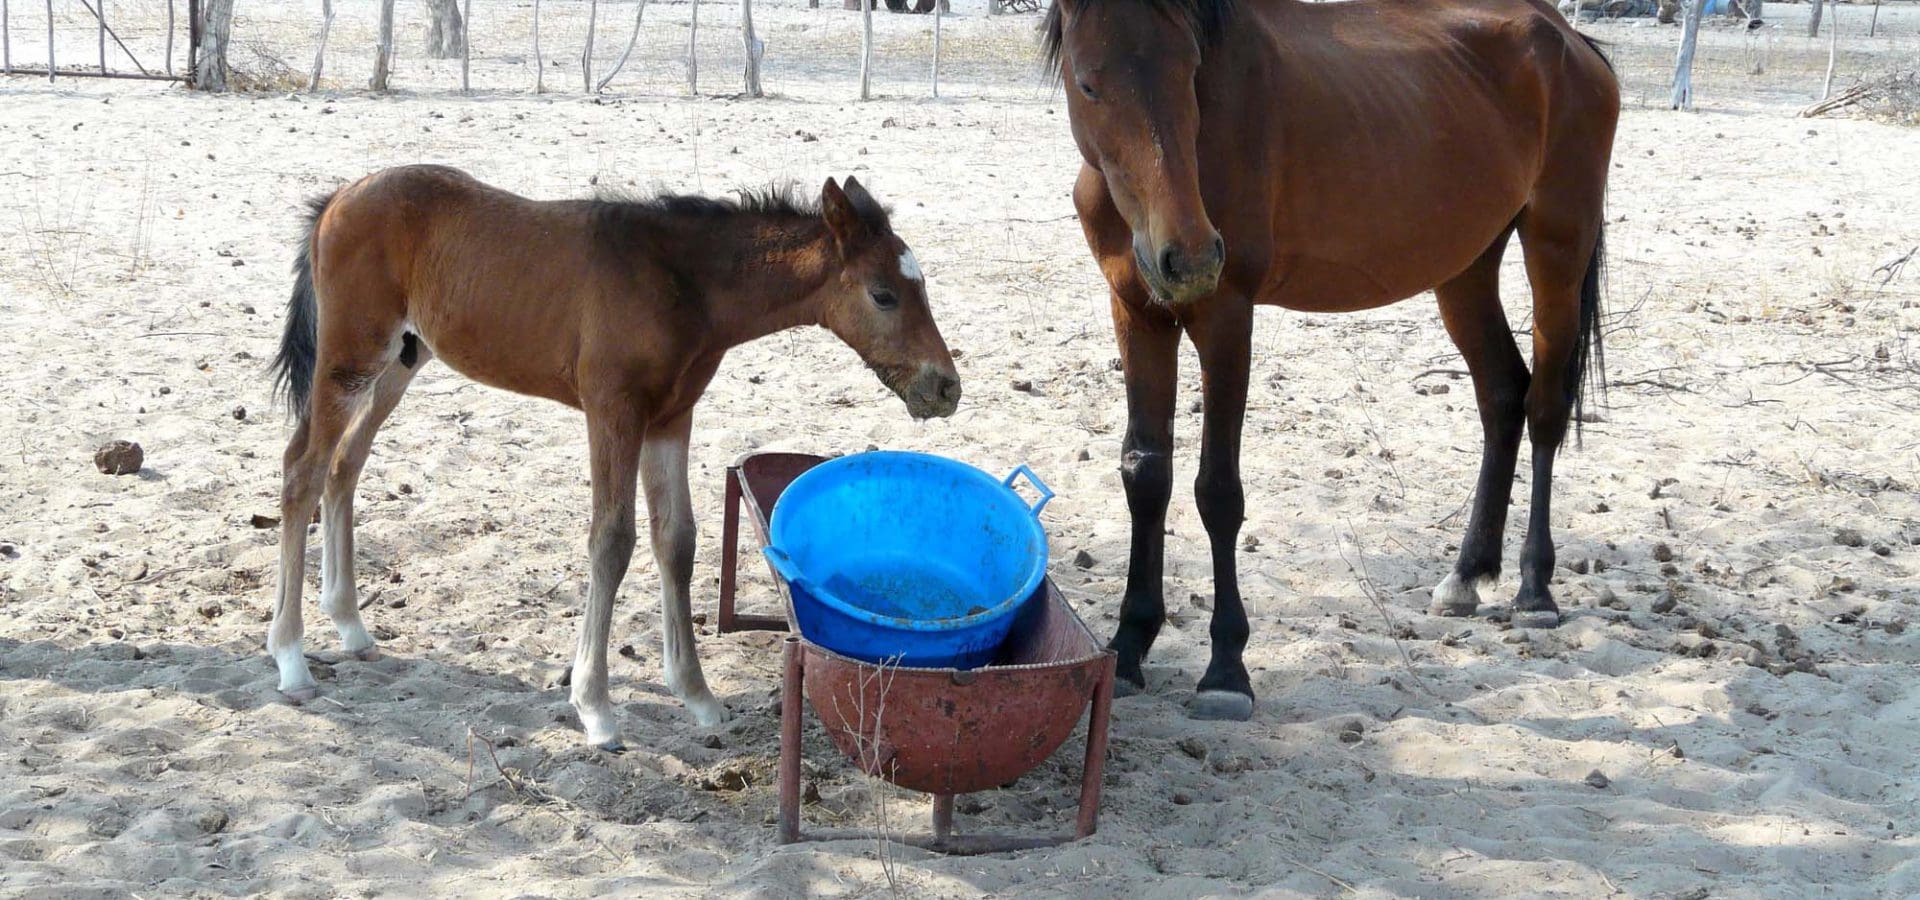 Foal and horse at feeding trough